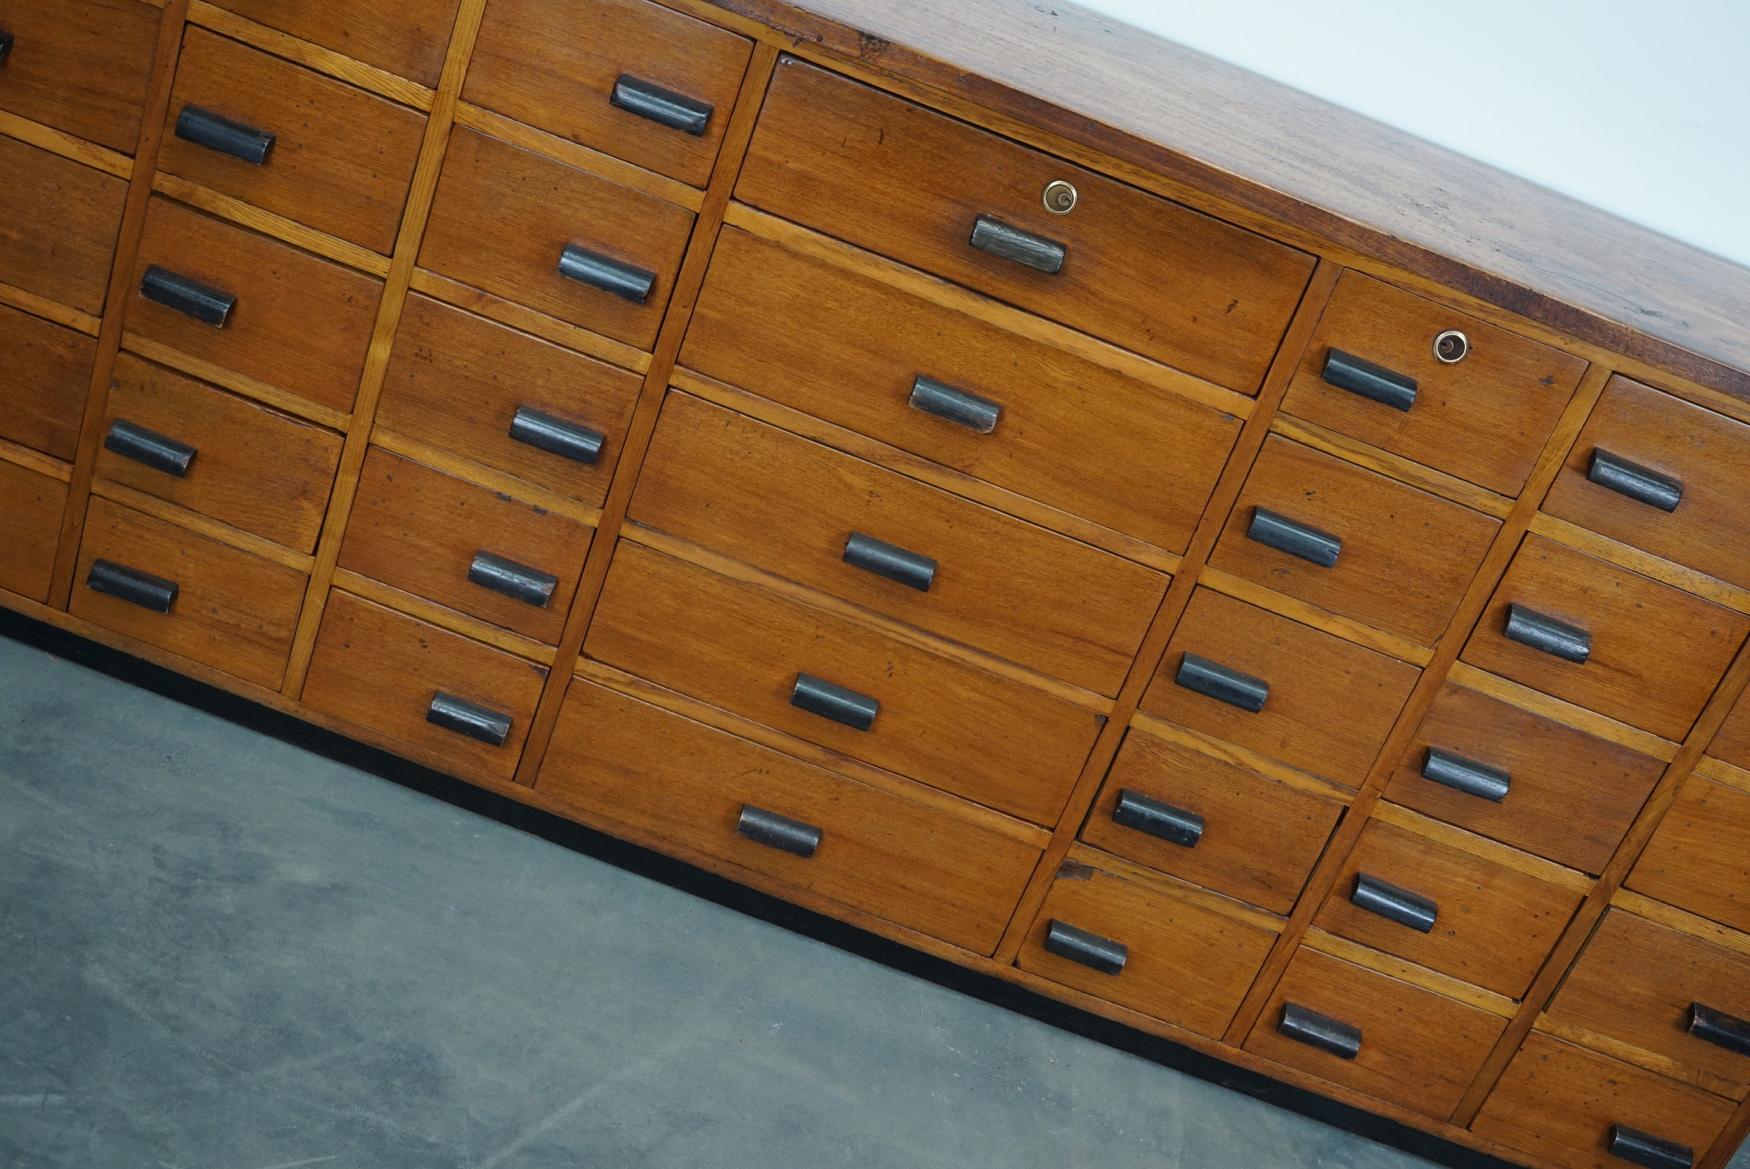 This large apothecary cabinet was made in Germany, circa 1940s. It features 35 drawers in two sizes with nice black wooden handles. It is made oak and pine and it retained a nice patina from years of use. The interior dimensions of the drawers are: